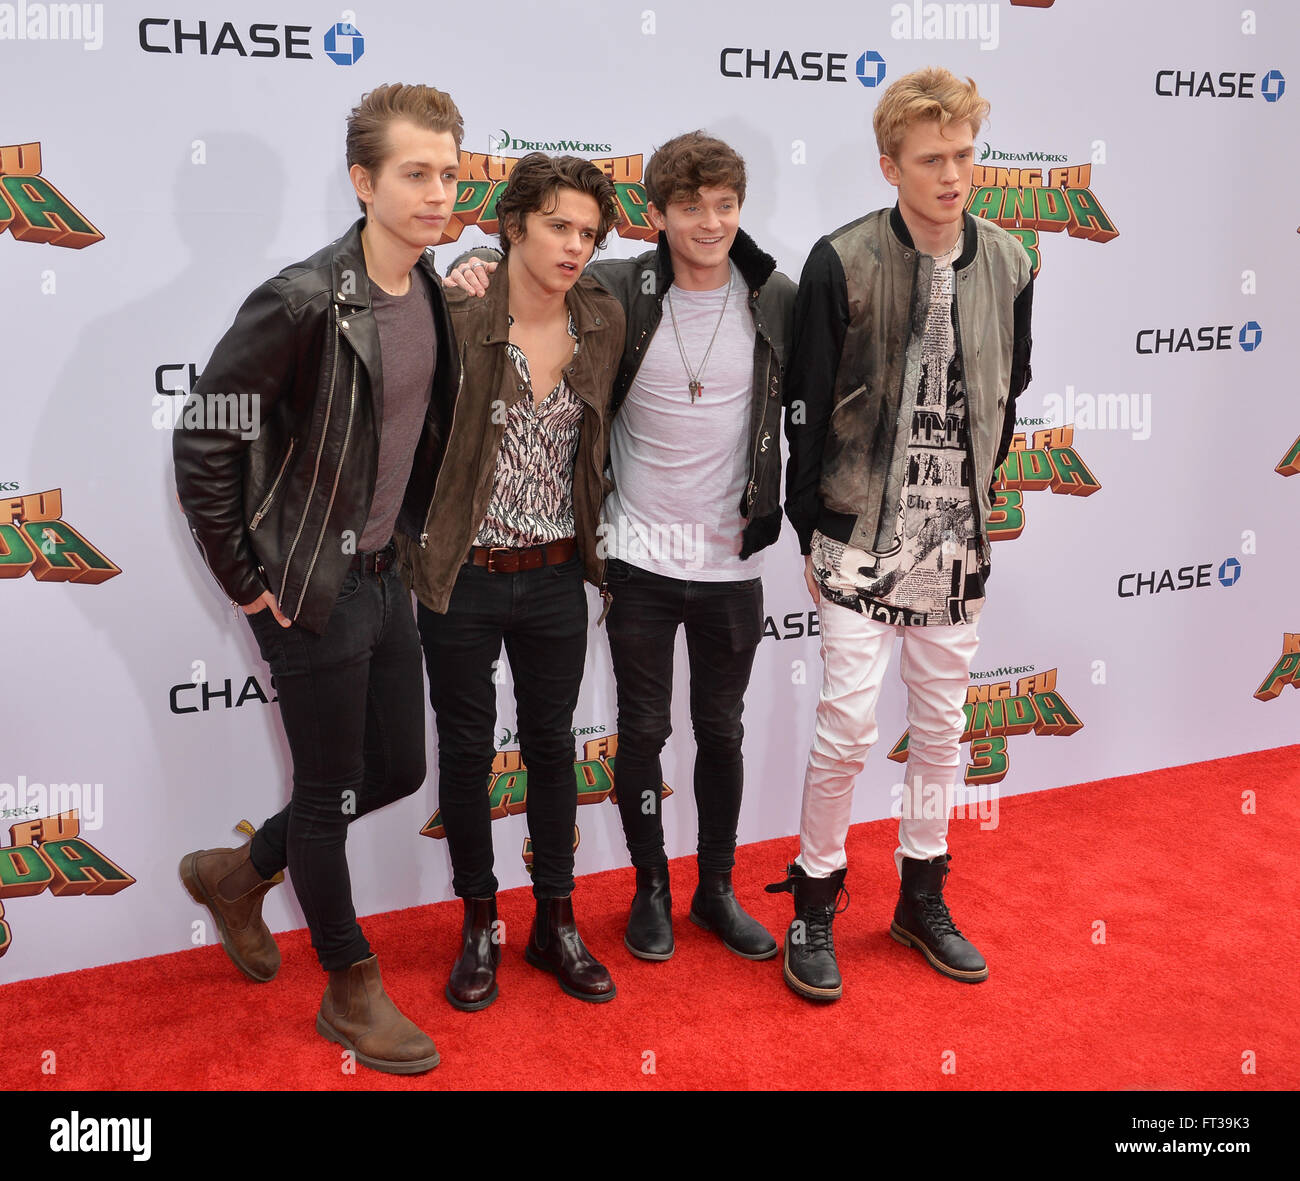 LOS ANGELES, CA - JANUARY 16, 2016: Recording group The Vamps - Brad Simpson, James McVey, Connor Ball & Tristan Evans - at the world premiere of Kung Fu Panda 3 at the TCL Chinese Theatre, Hollywood. Stock Photo